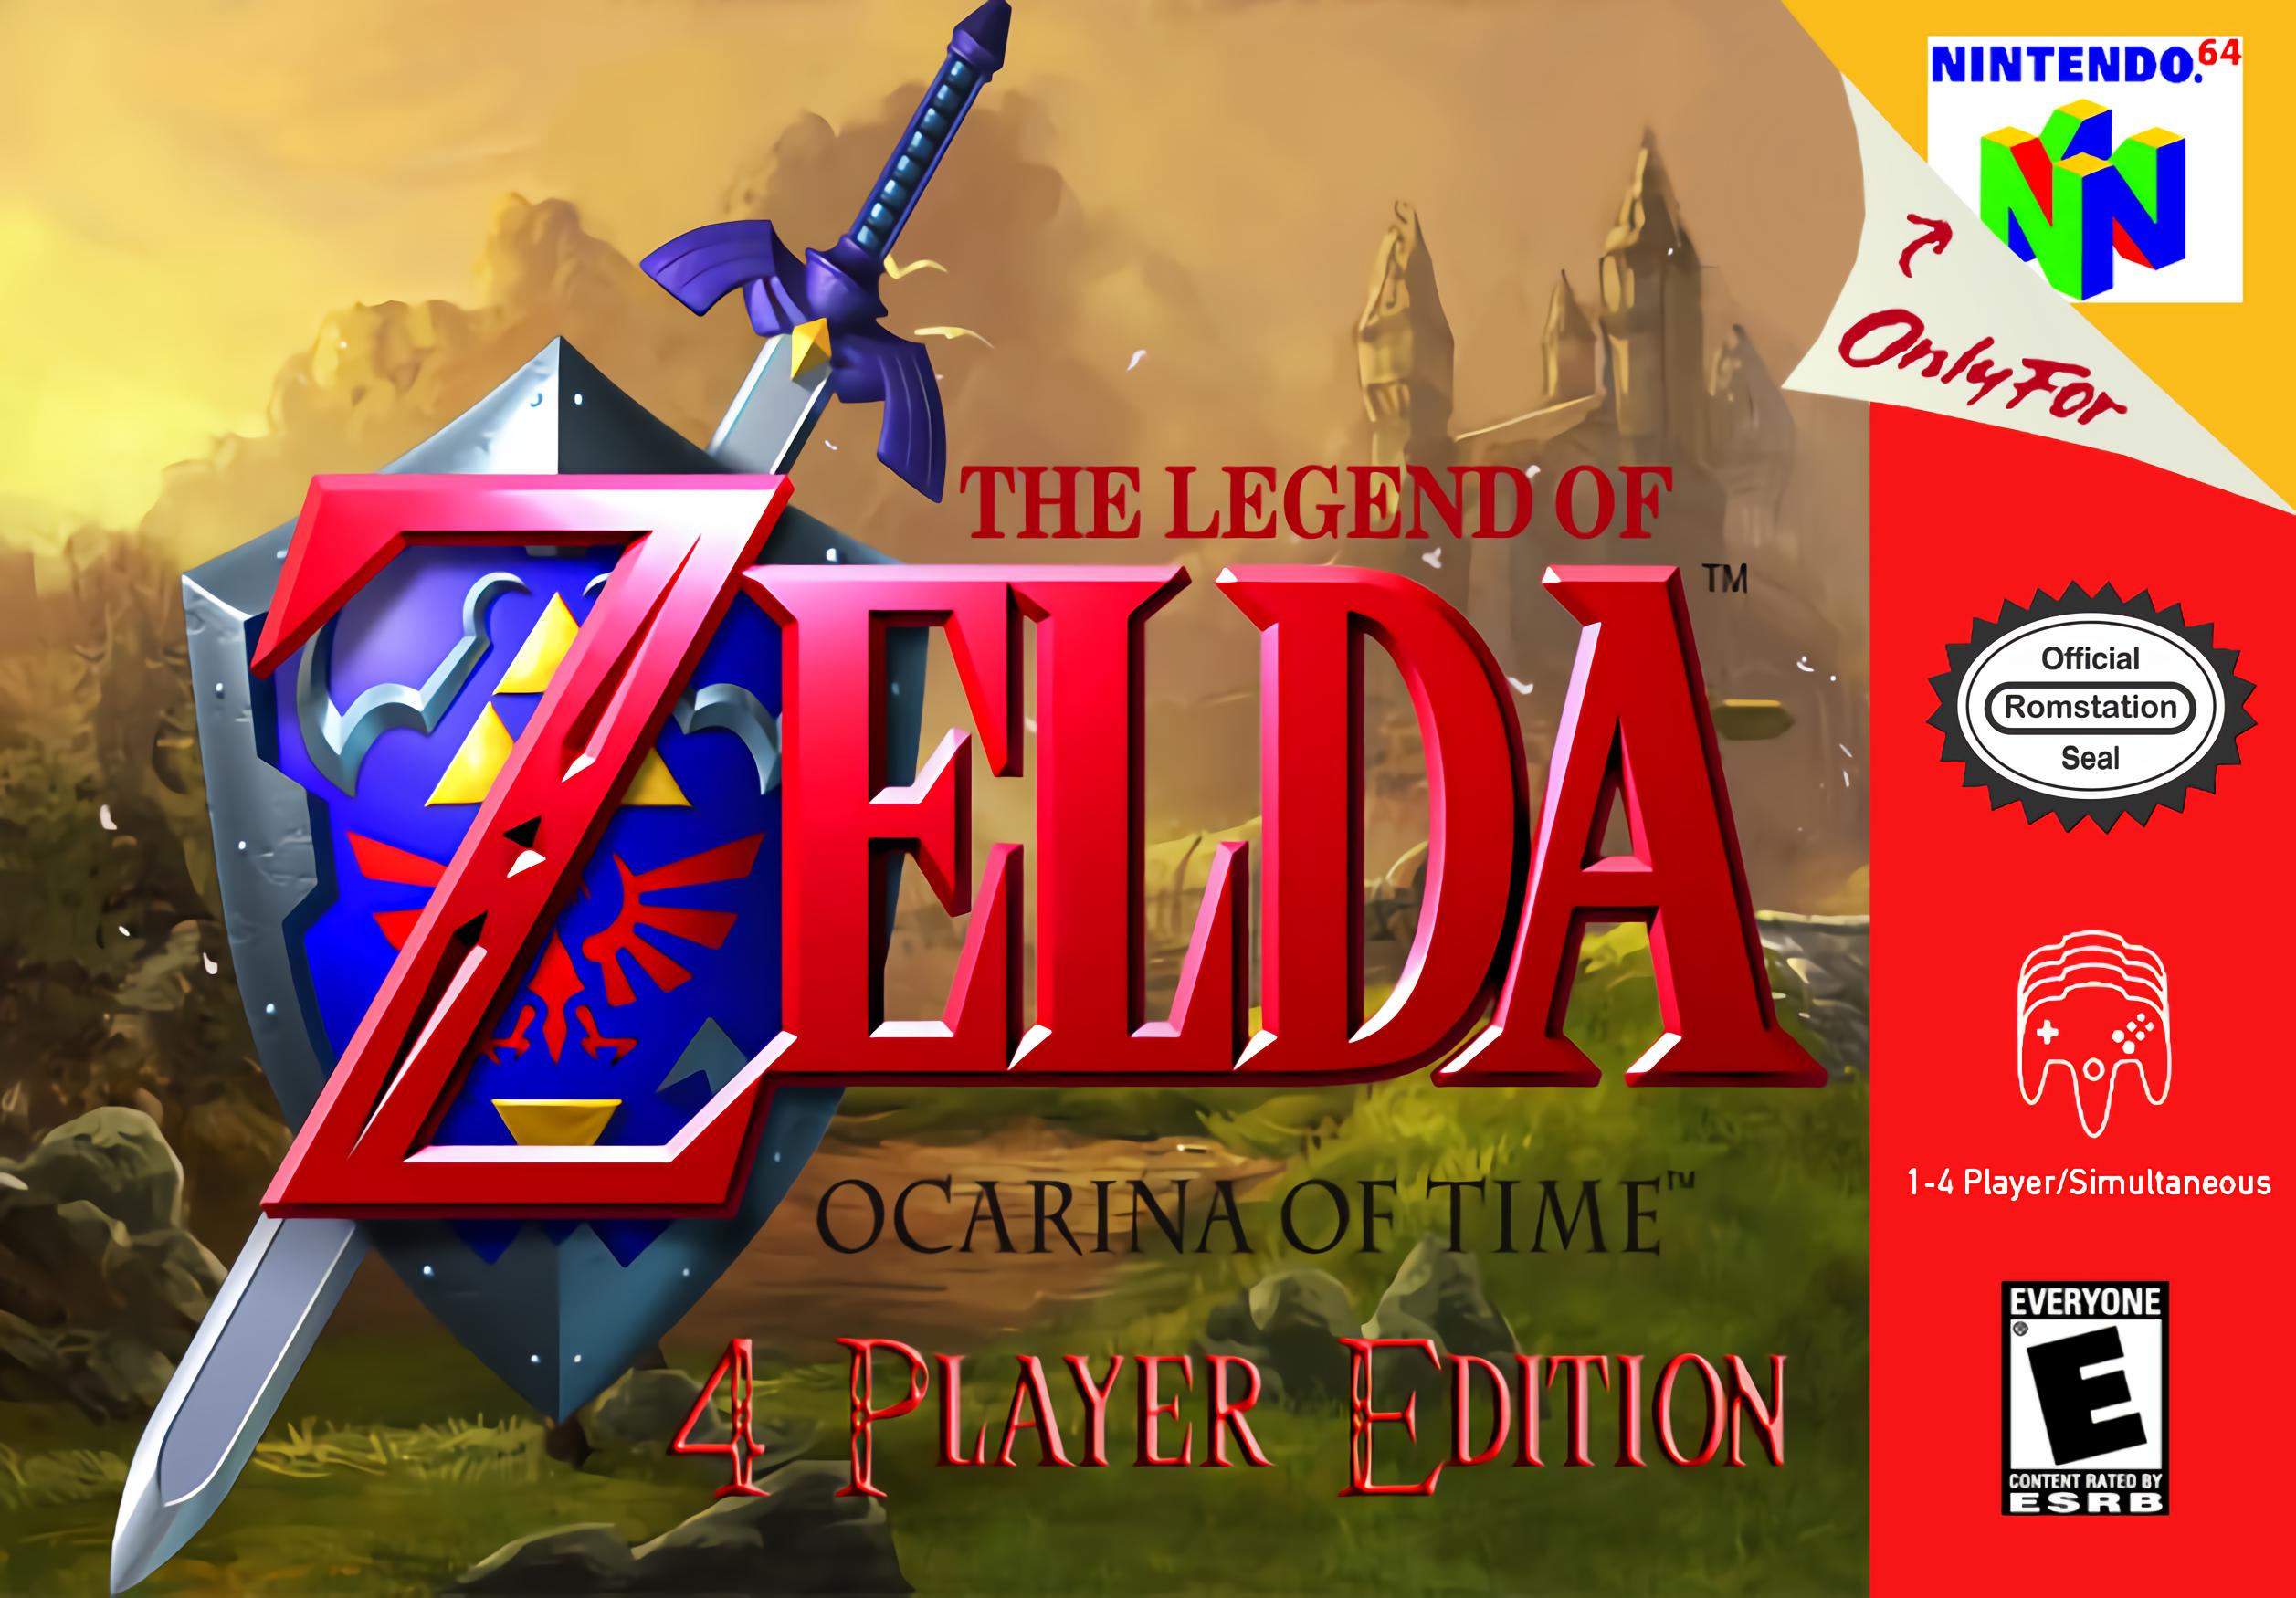 The Legend of Zelda: Ocarina of Time - 4 Player Edition